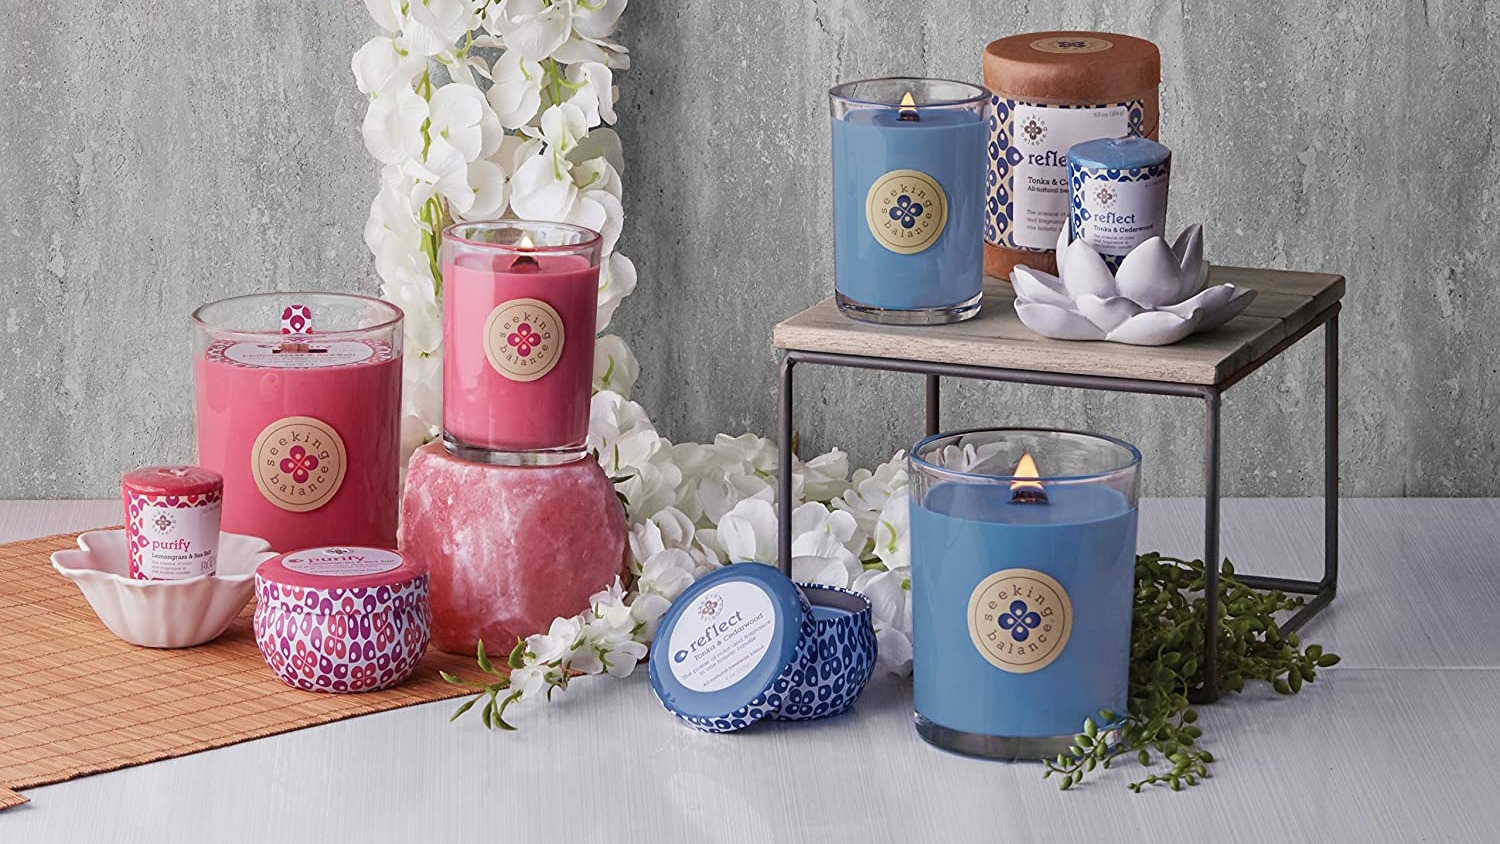 https://mammothpackaging.com/wp-content/uploads/2021/02/us-candle-lable-requirements.jpg